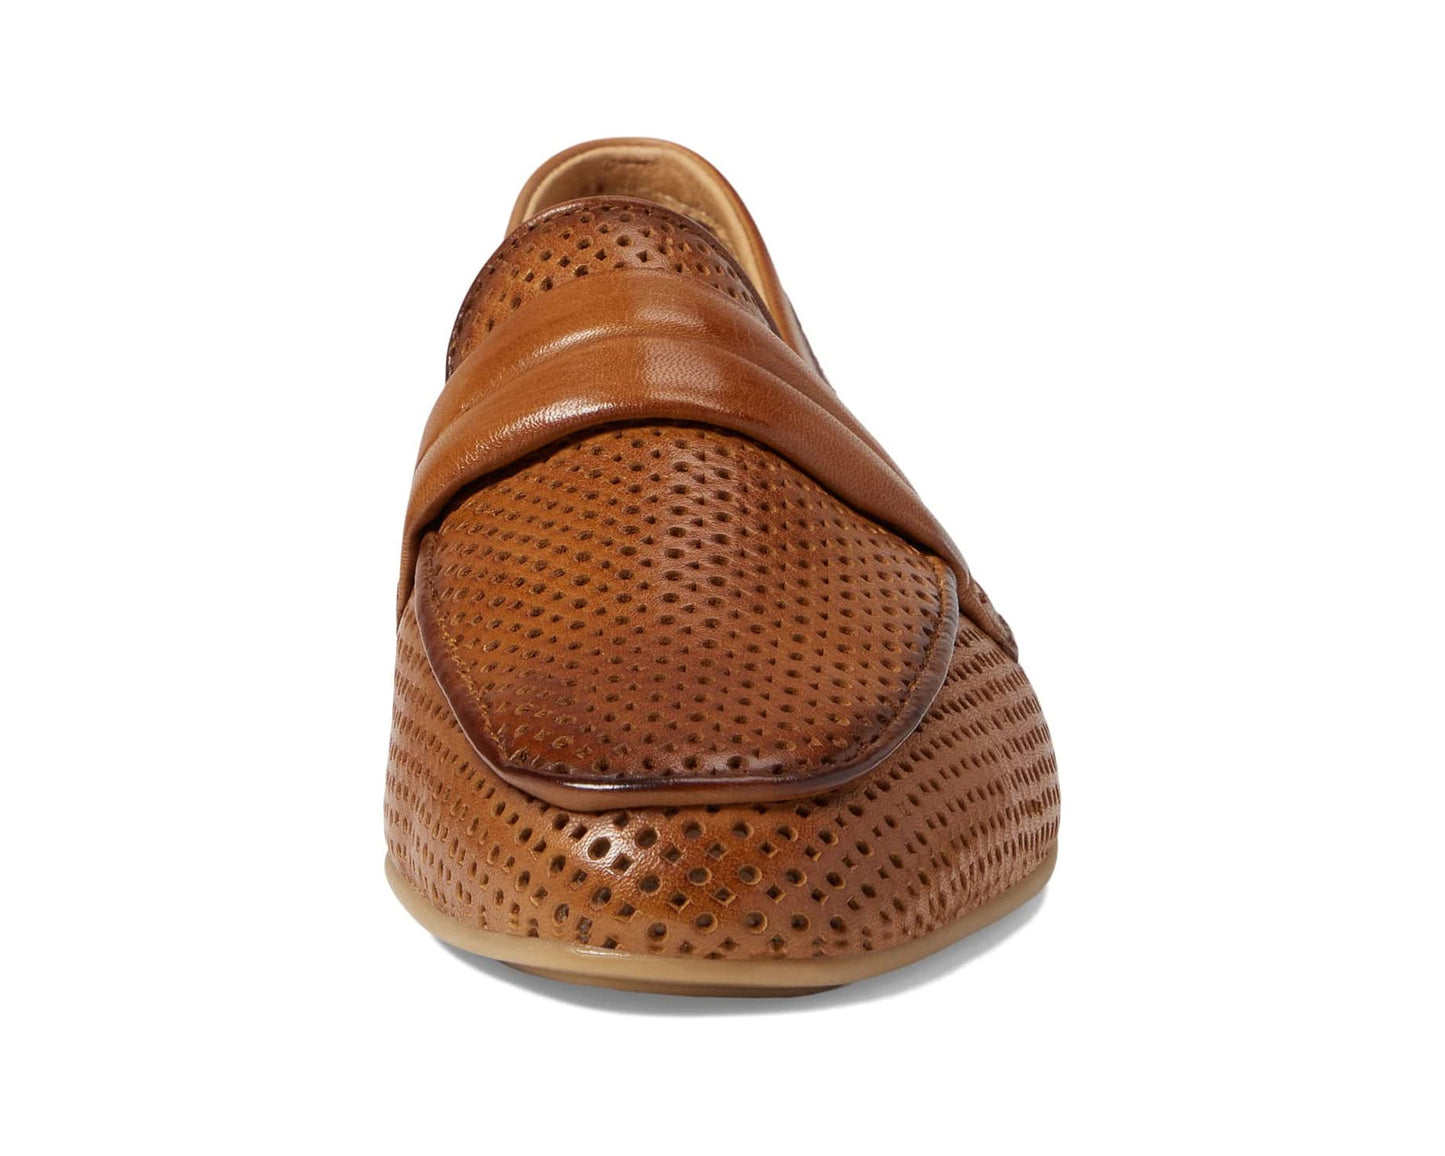 Almeria Perforated Leather Loafers